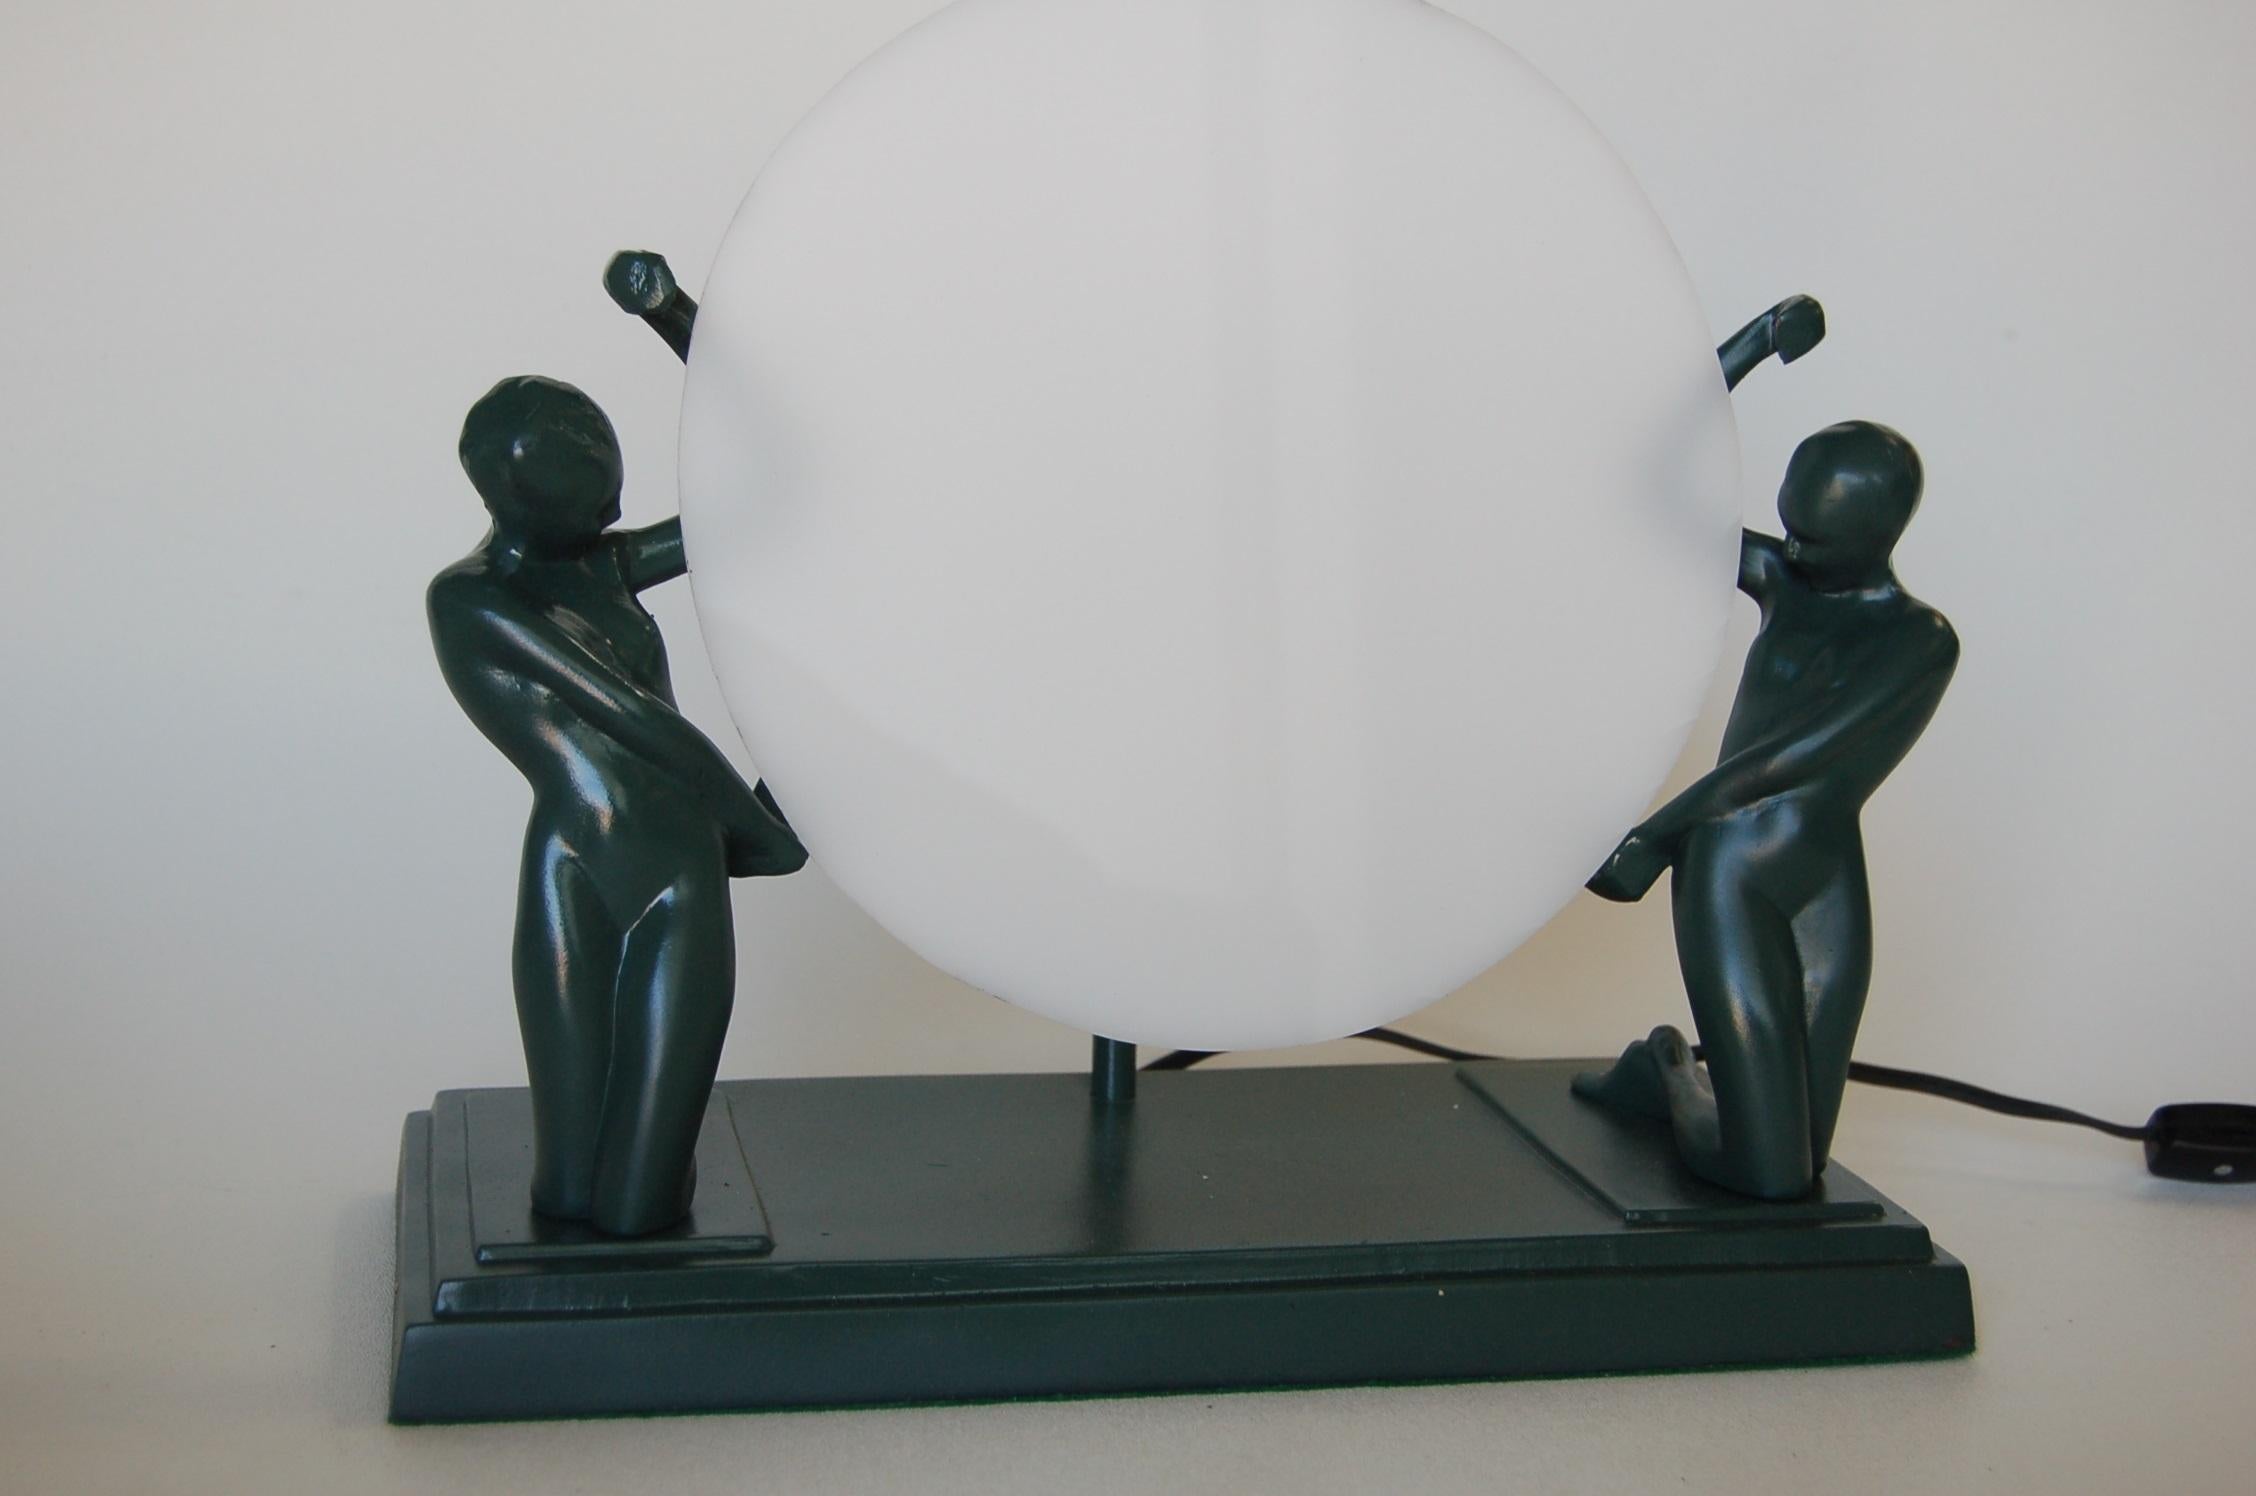 Striking Frankart style accent table lamp featuring kneeling nude female figurines holding plexiglass disc in green. Toggle light switch.

Measures 12.5 wide x 6